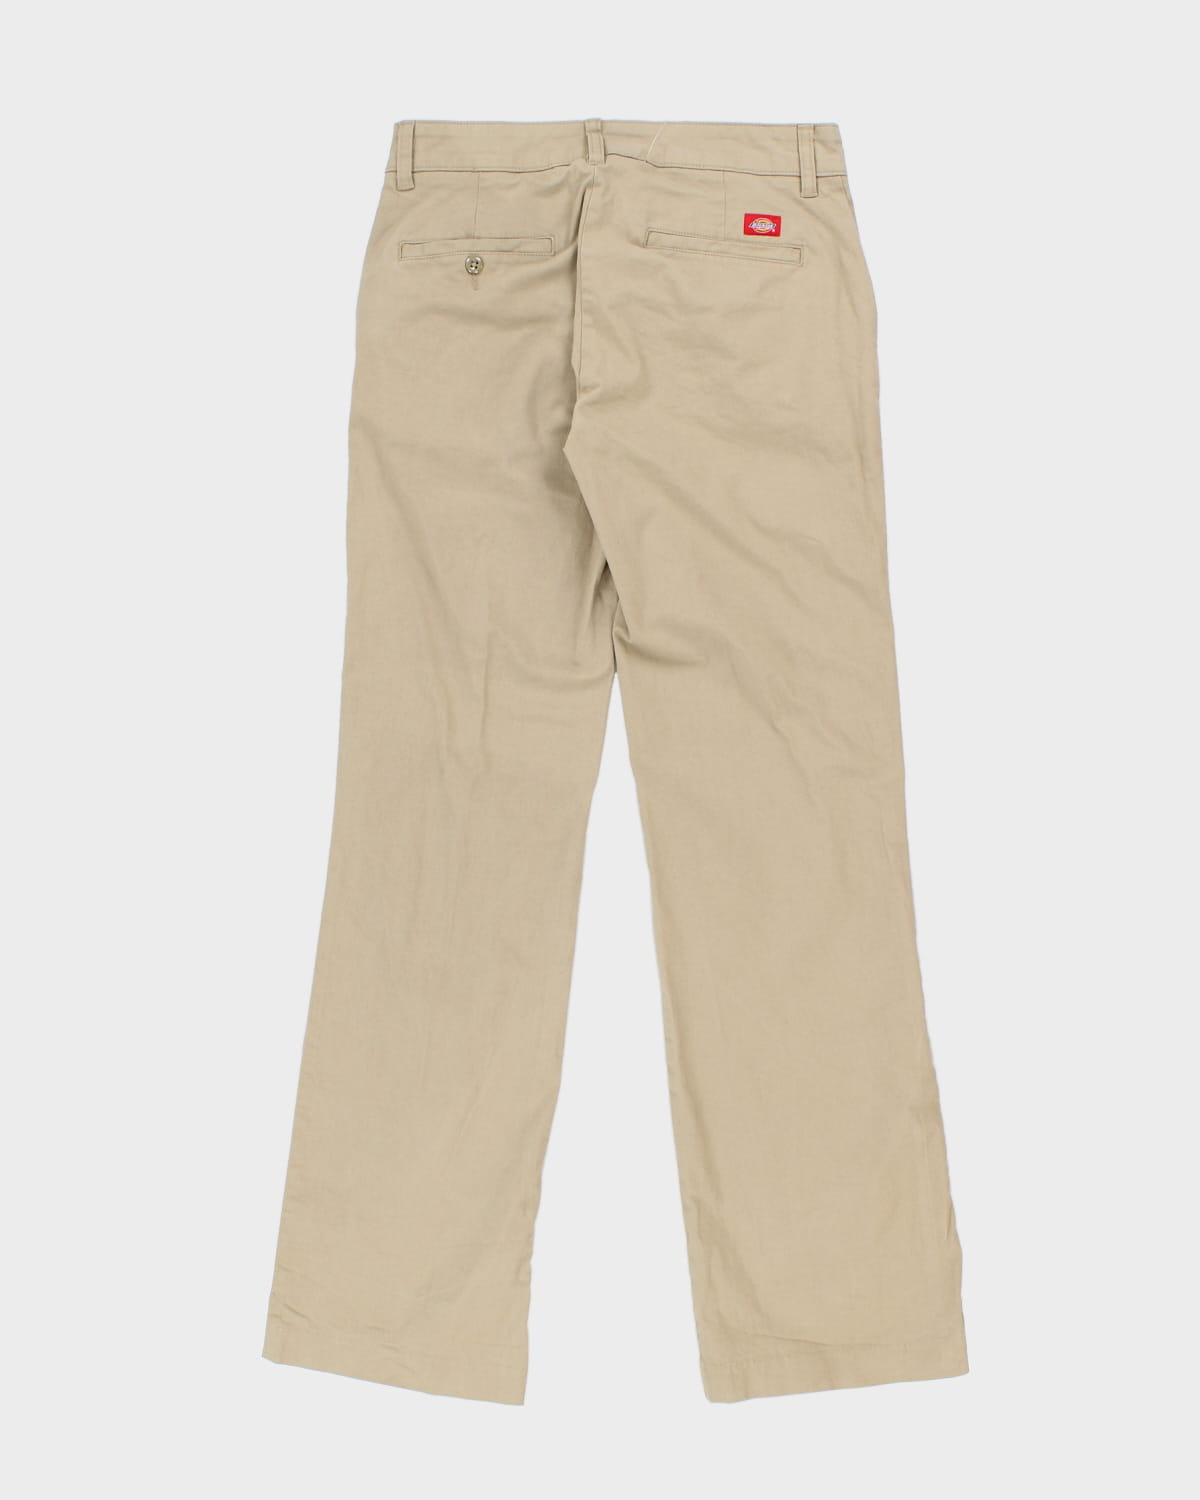 Dickies Women's Relaxed Fit Beige Trousers - W30 L31